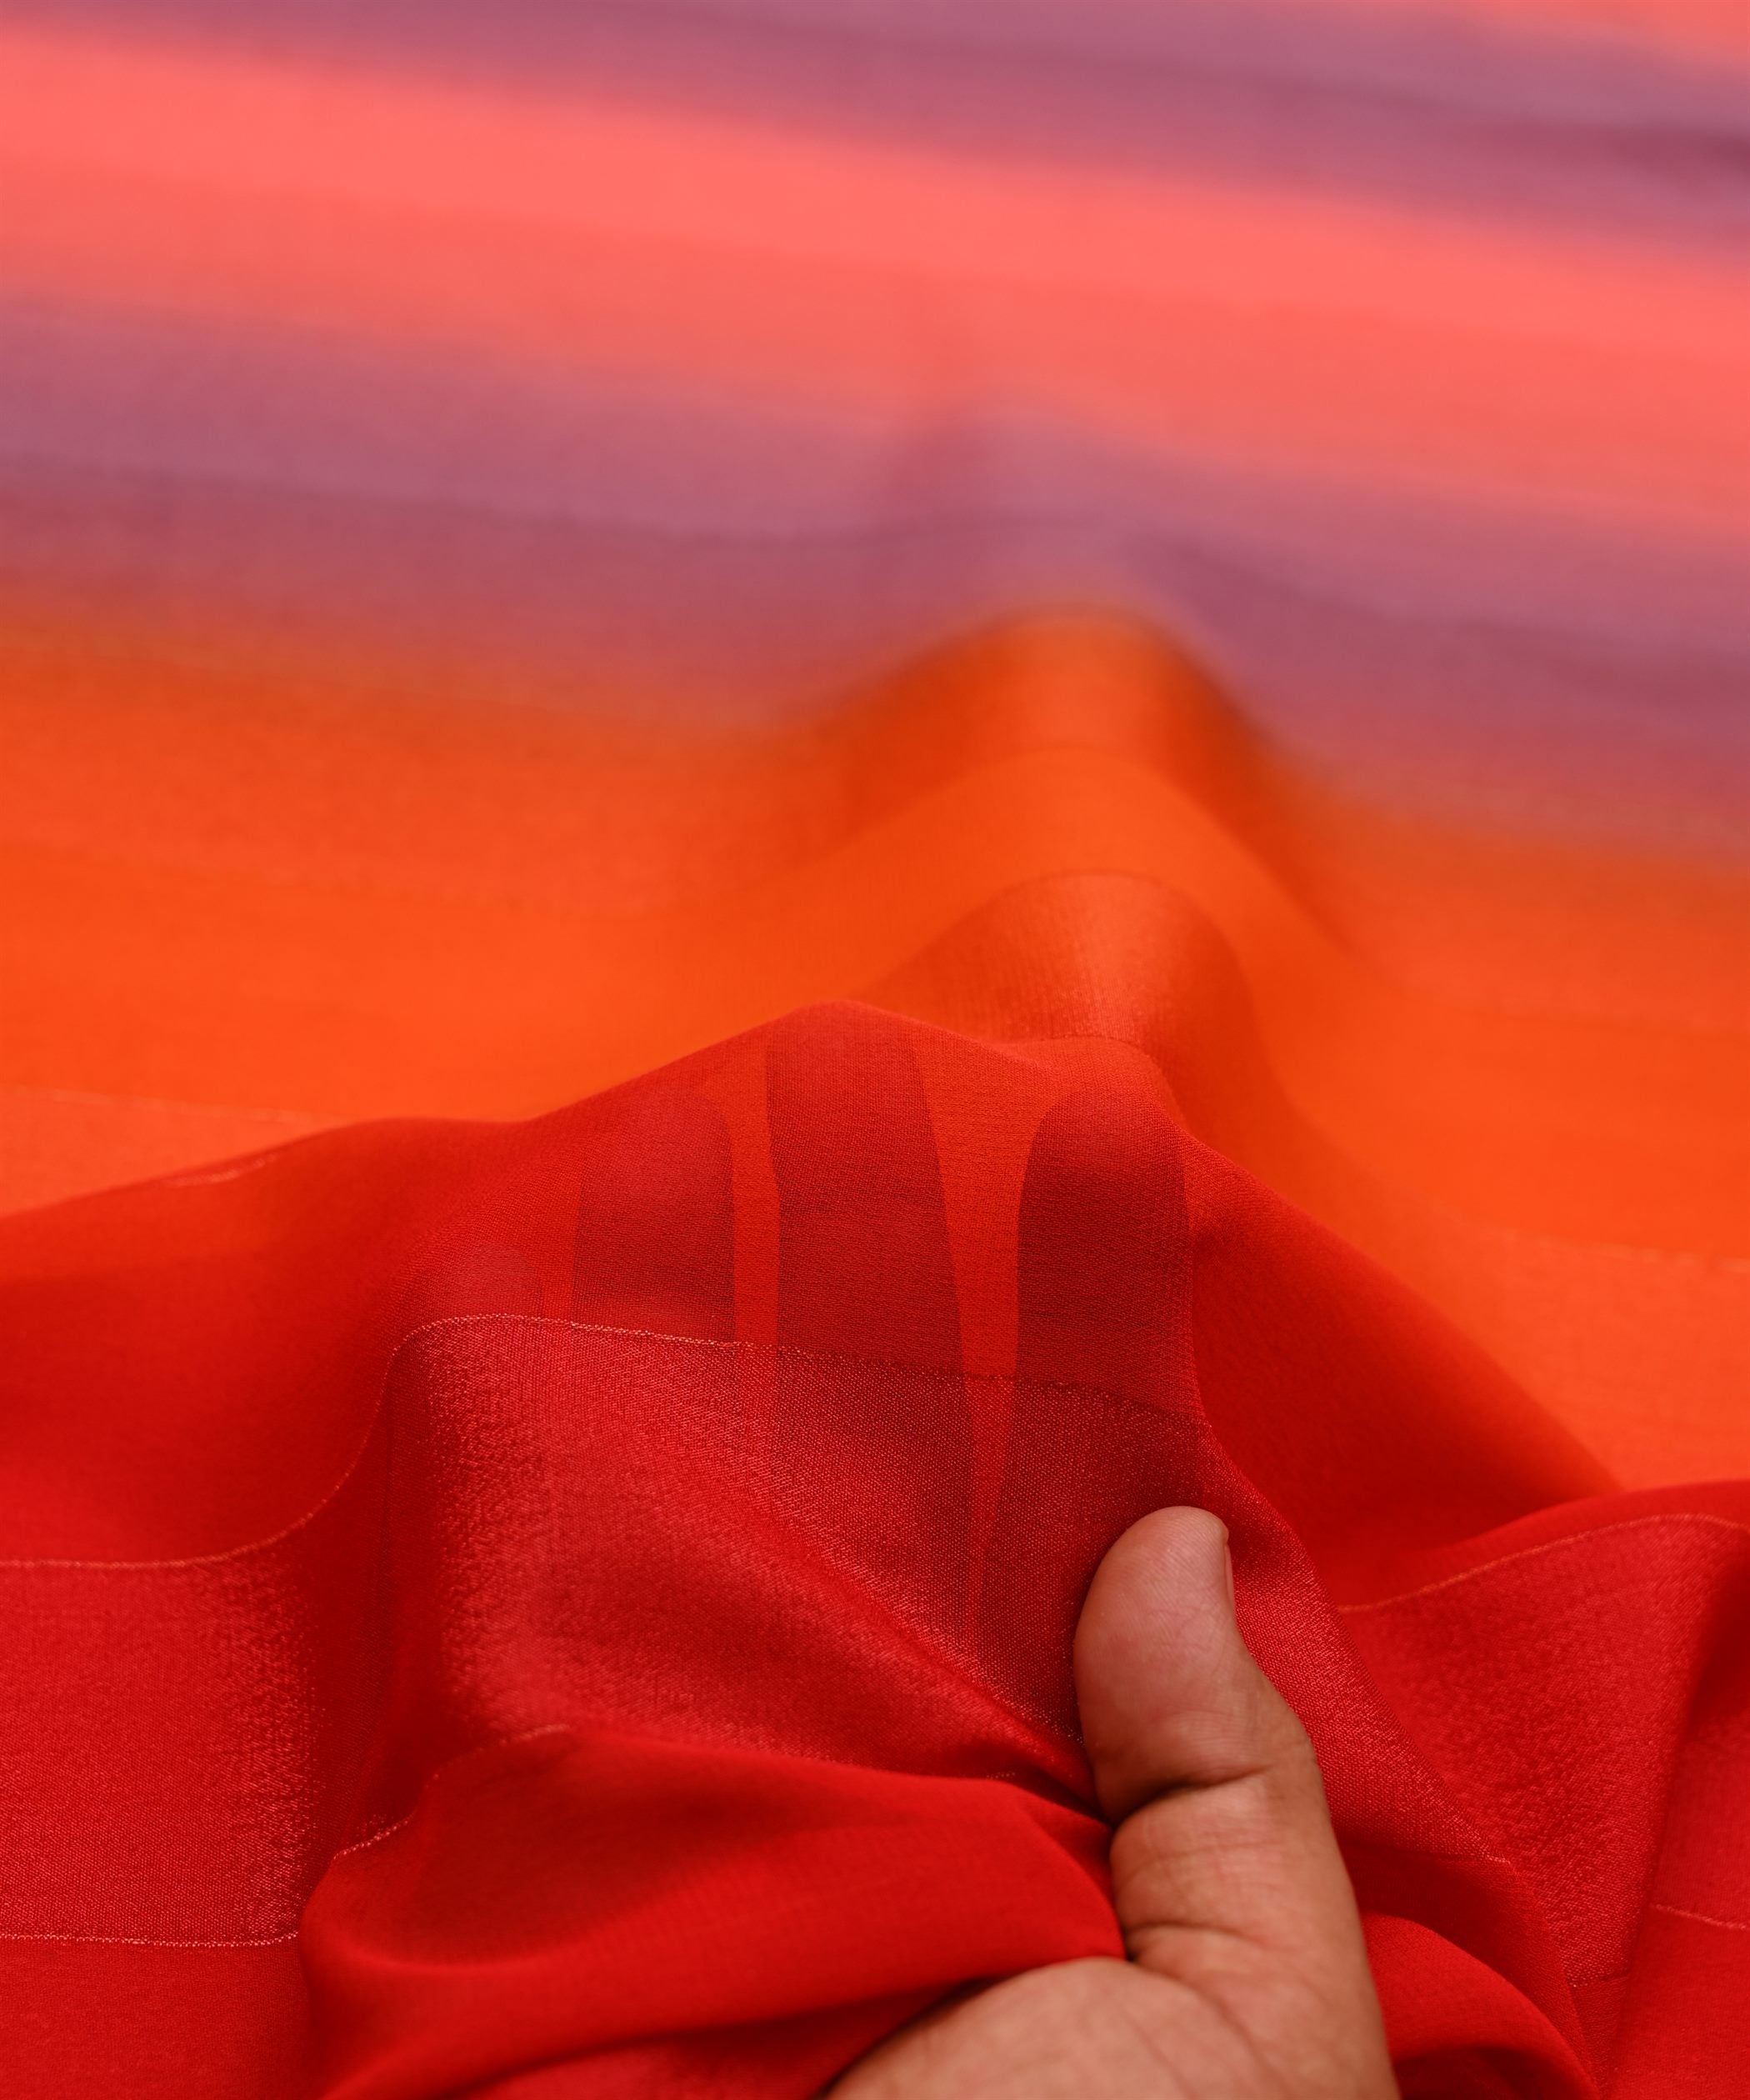 Orange-Red Shaded Weightless Fabric with Zari and Satin Stripes